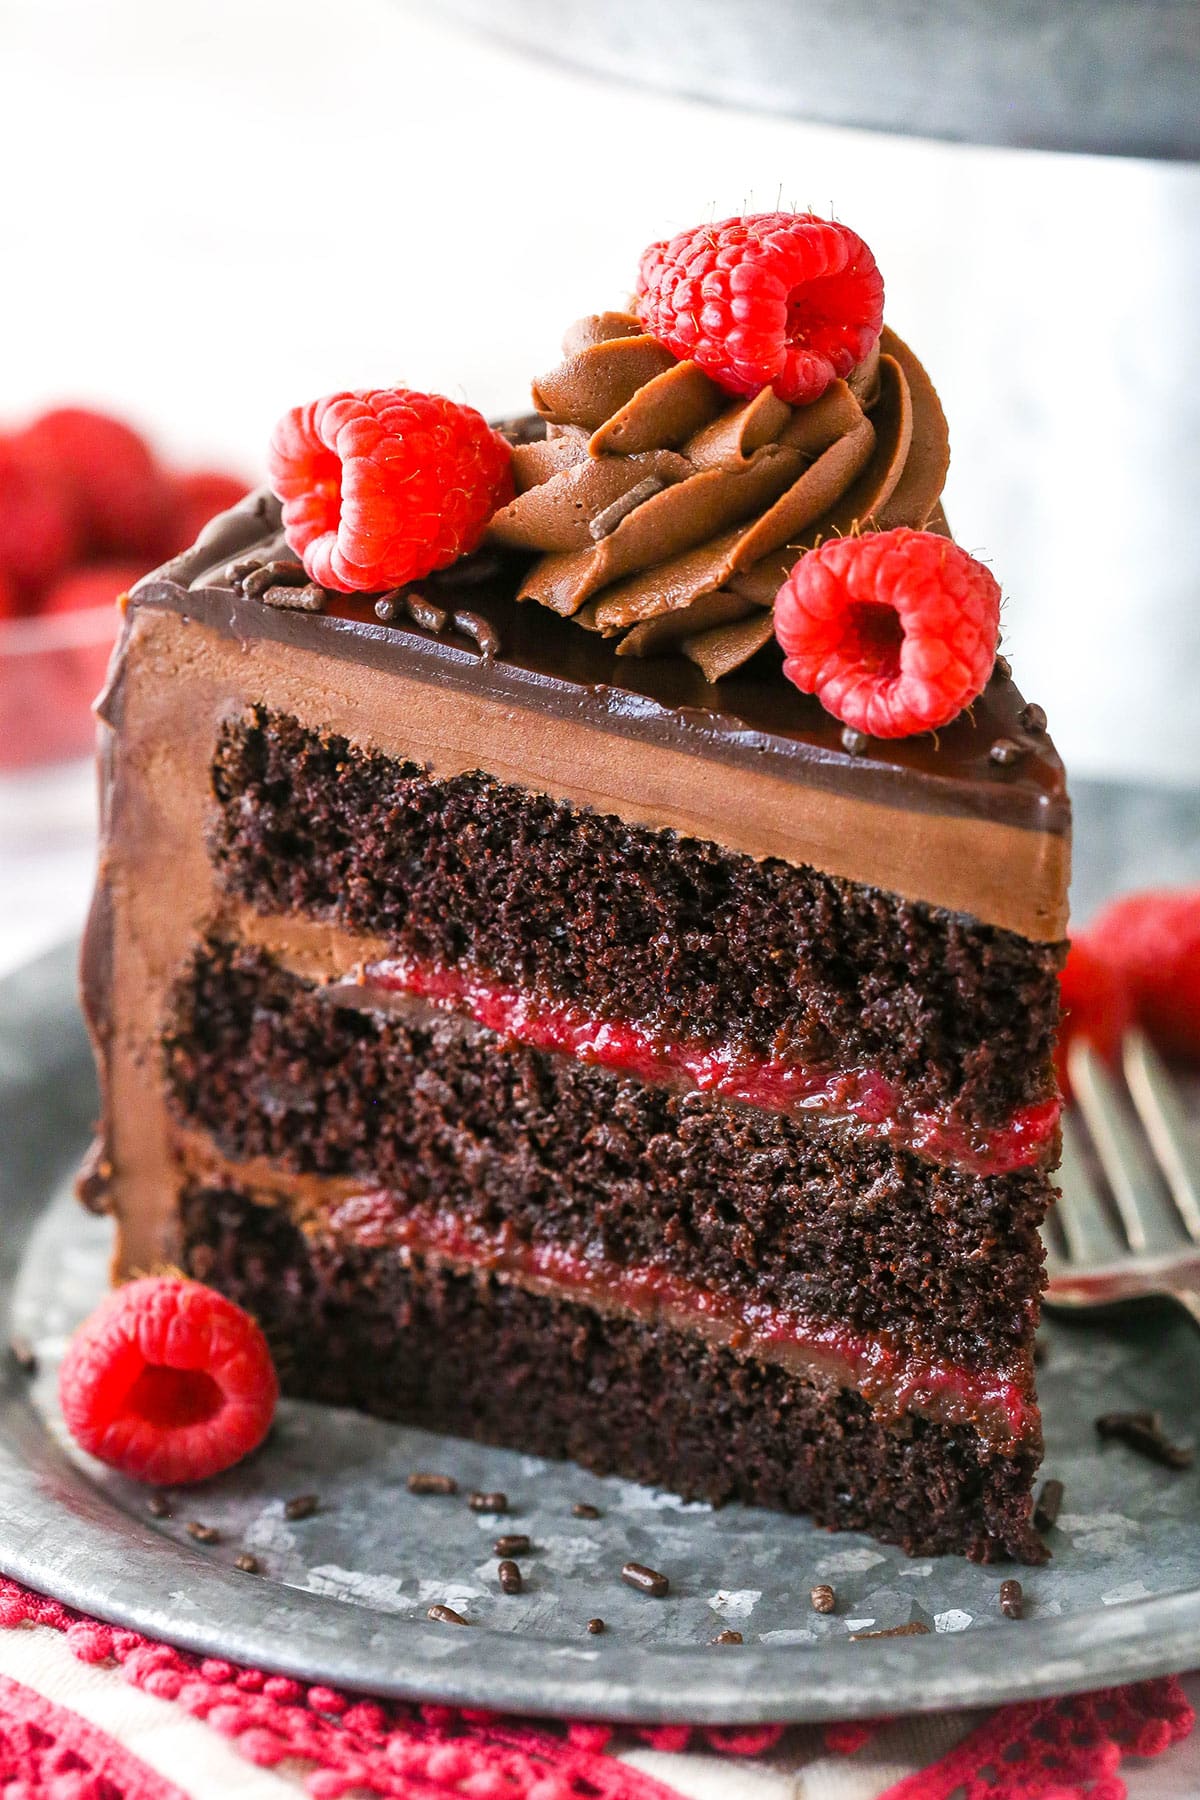 A slice of chocolate raspberry layer cake on a plate with a fork.